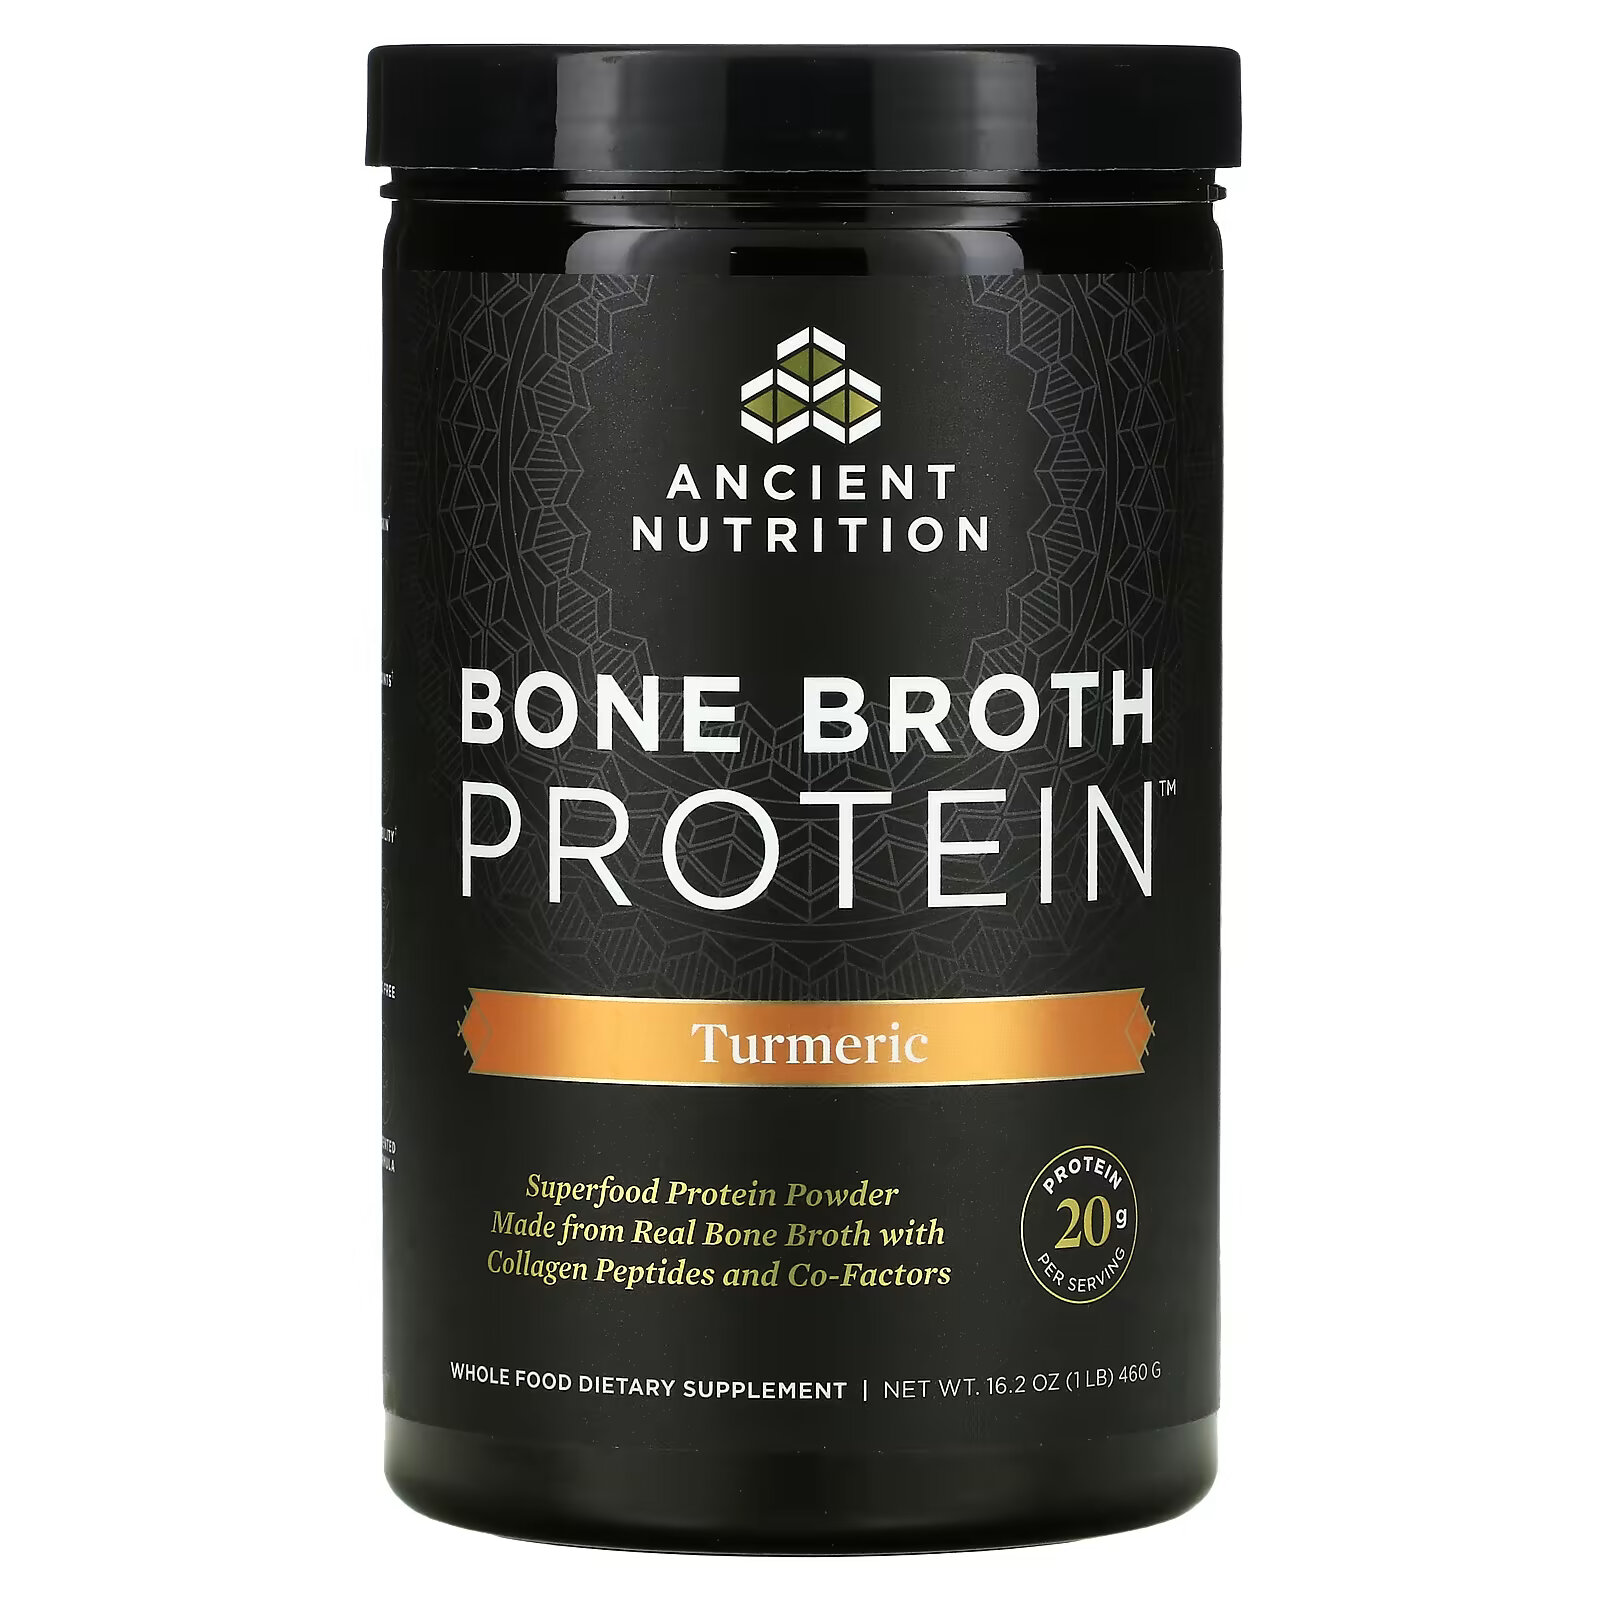 Dr. Axe / Ancient Nutrition, Bone Broth Protein, куркума, 460 г (1 фунт) dr axe ancient nutrition bone broth protein куркума 460 г 1 фунт